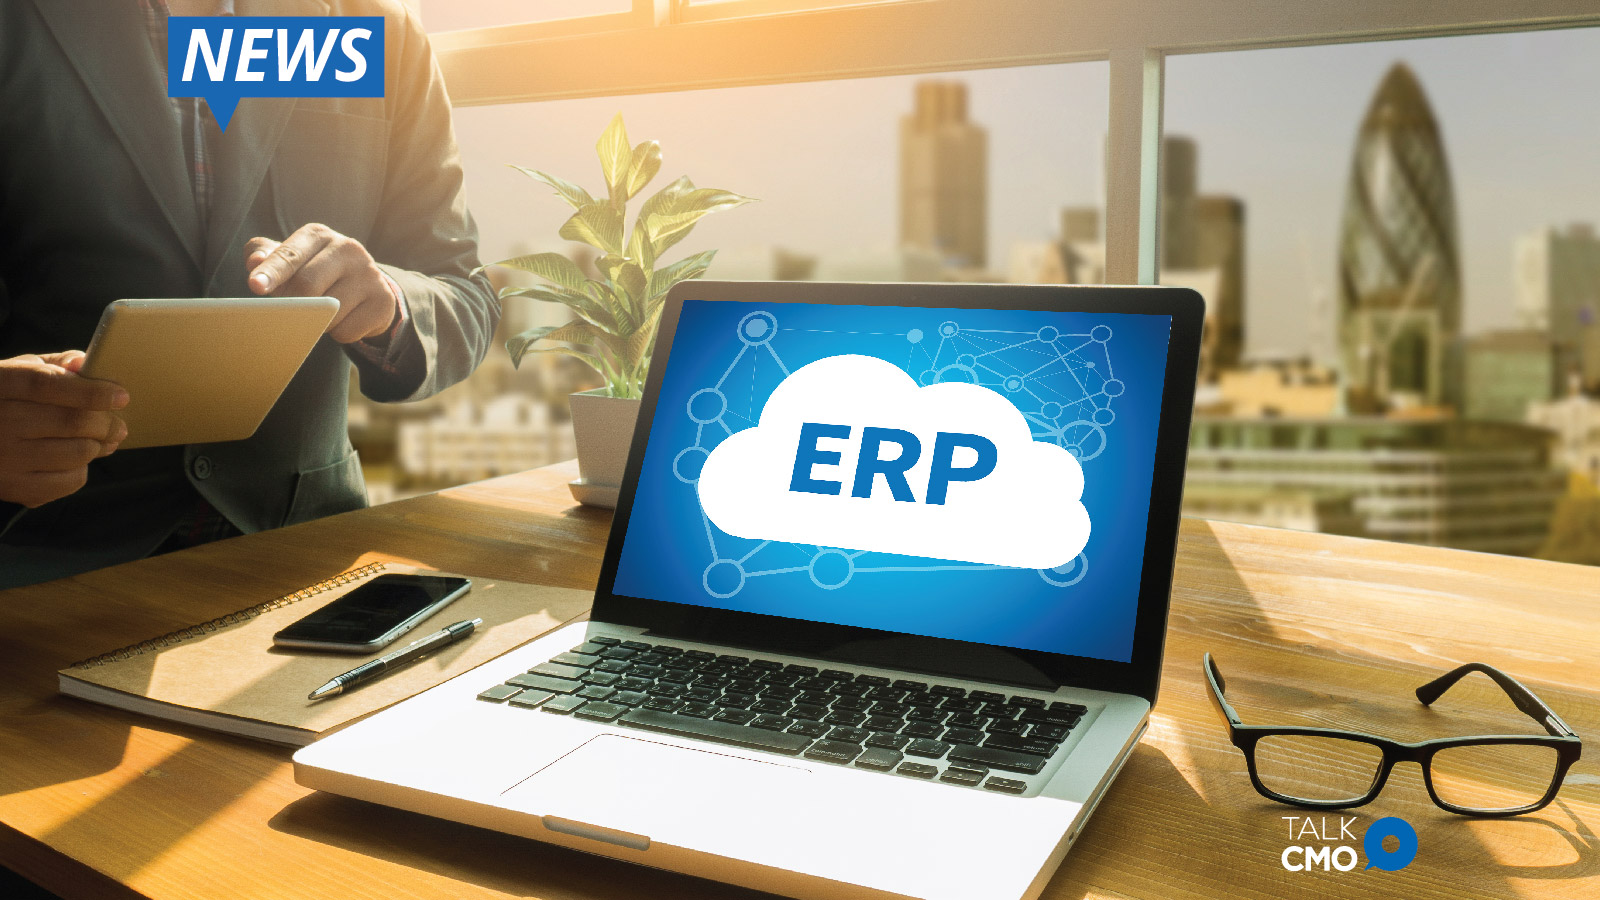 Asia-Pacific ERP Software Market to Reach $26.37 Billion by 2026